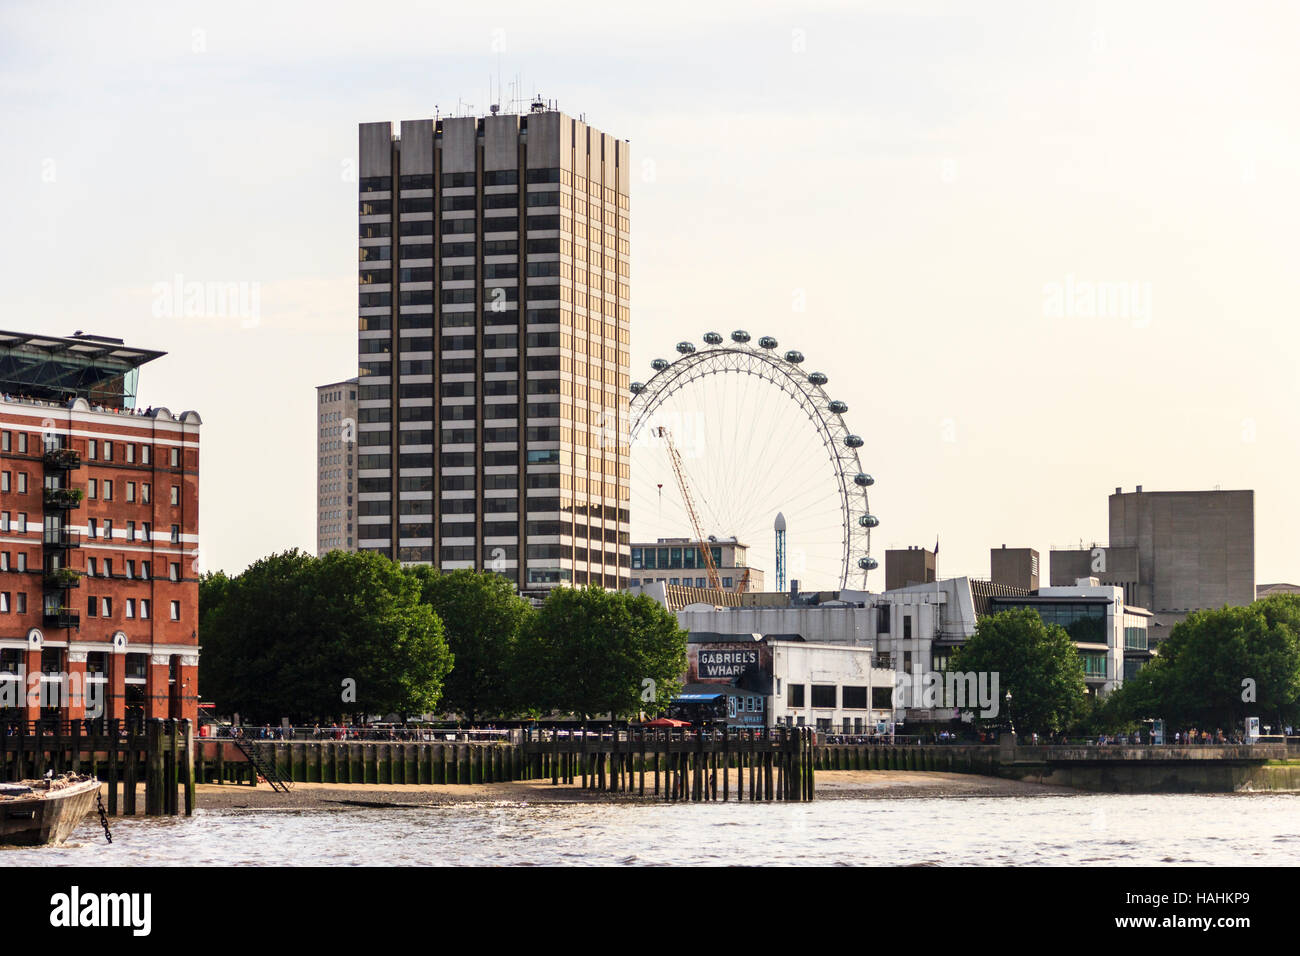 Gabriel's Wharf on the south bank of the River Thames, London, UK, the London Eye in the background Stock Photo